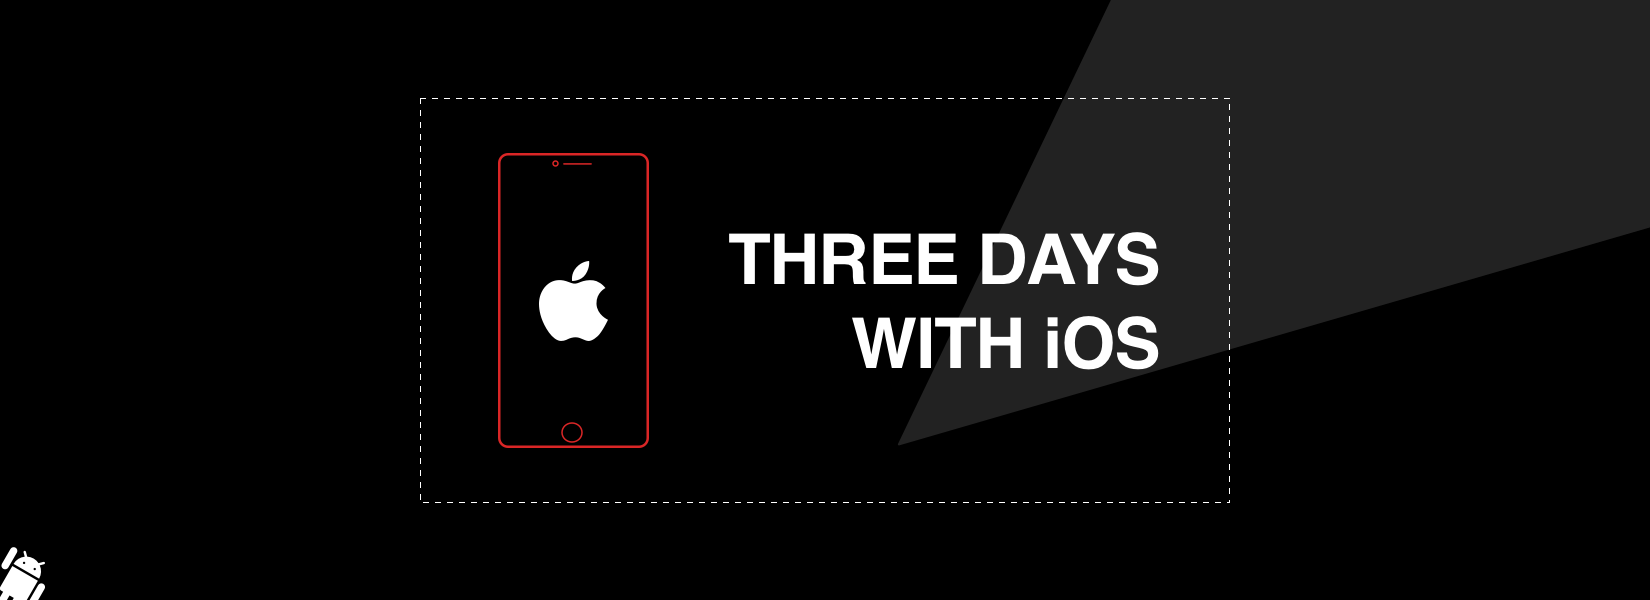 3 days with iOS - the Android user's perspective